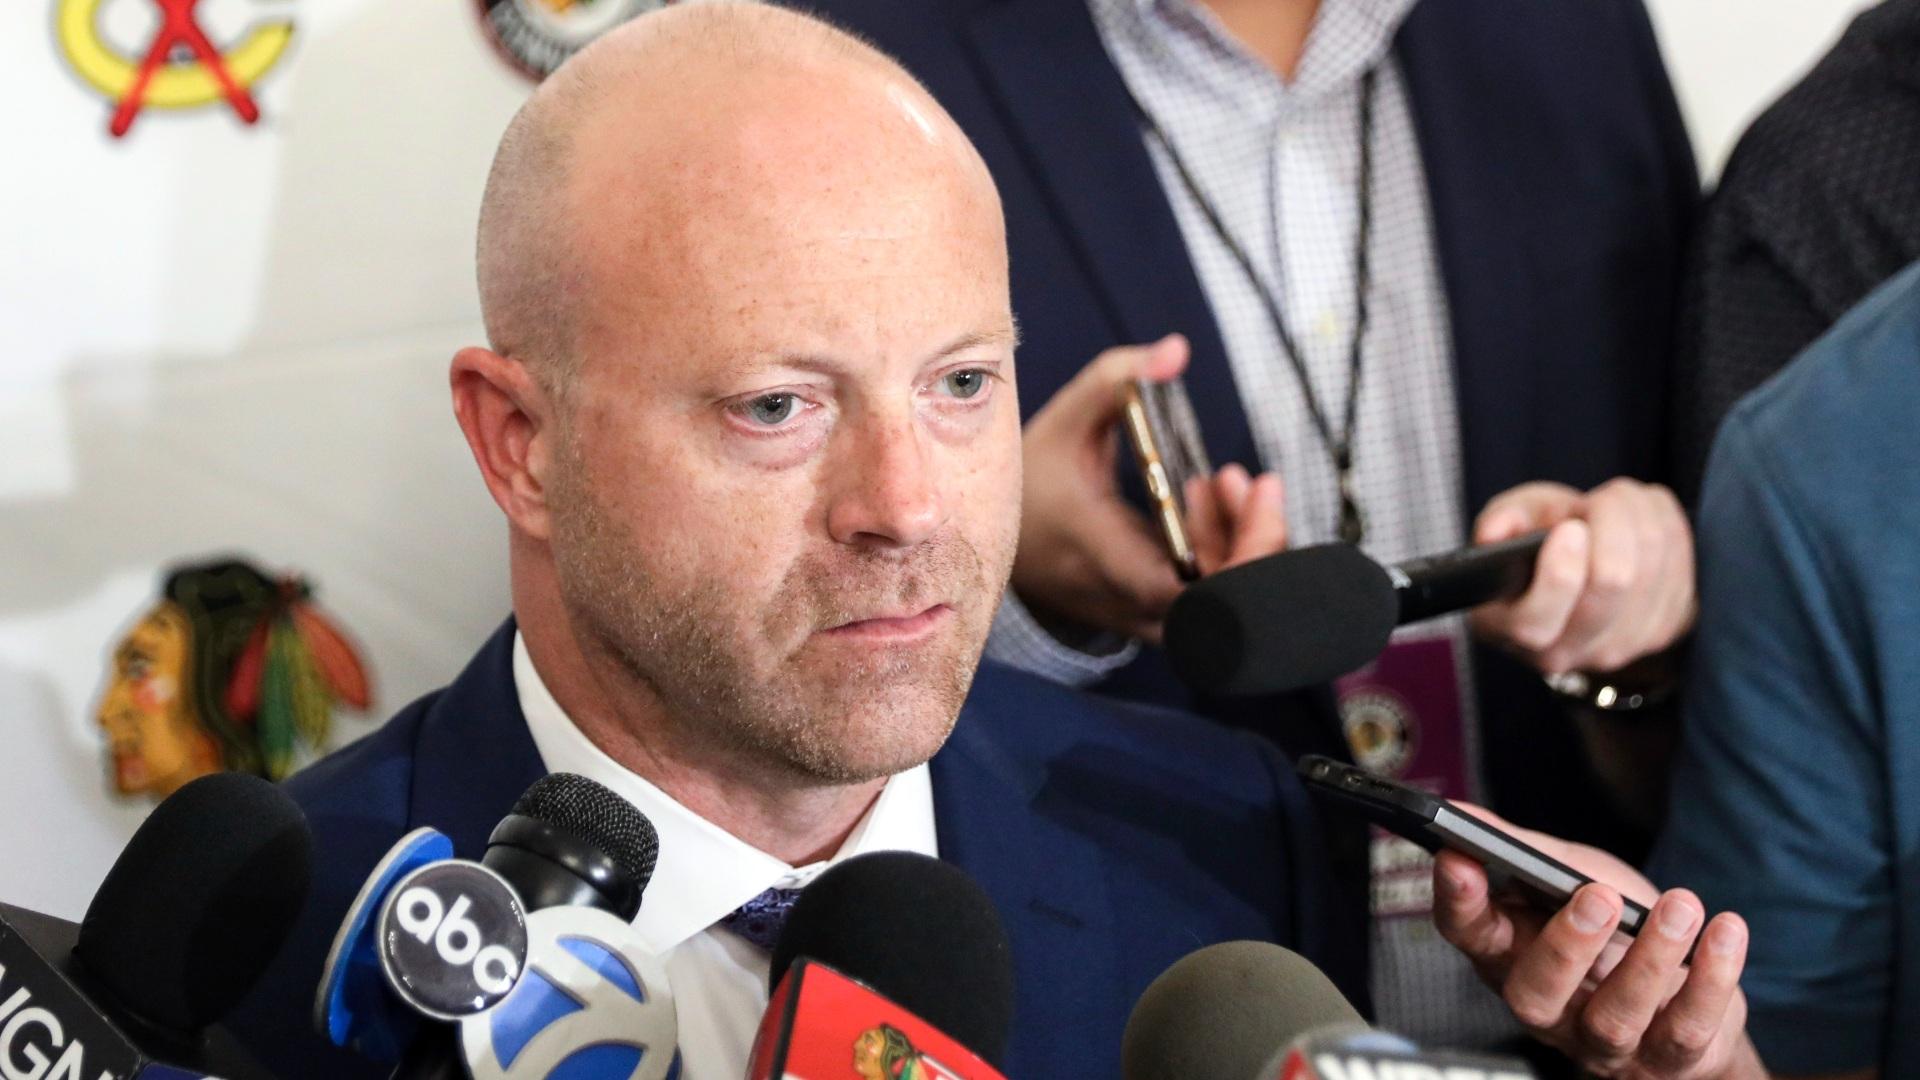 In this July 26, 2019, file photo, Chicago Blackhawks senior vice president and general manager Stan Bowman speaks to the media during the NHL hockey team’s convention in Chicago. (AP Photo / Amr Alfiky, File)